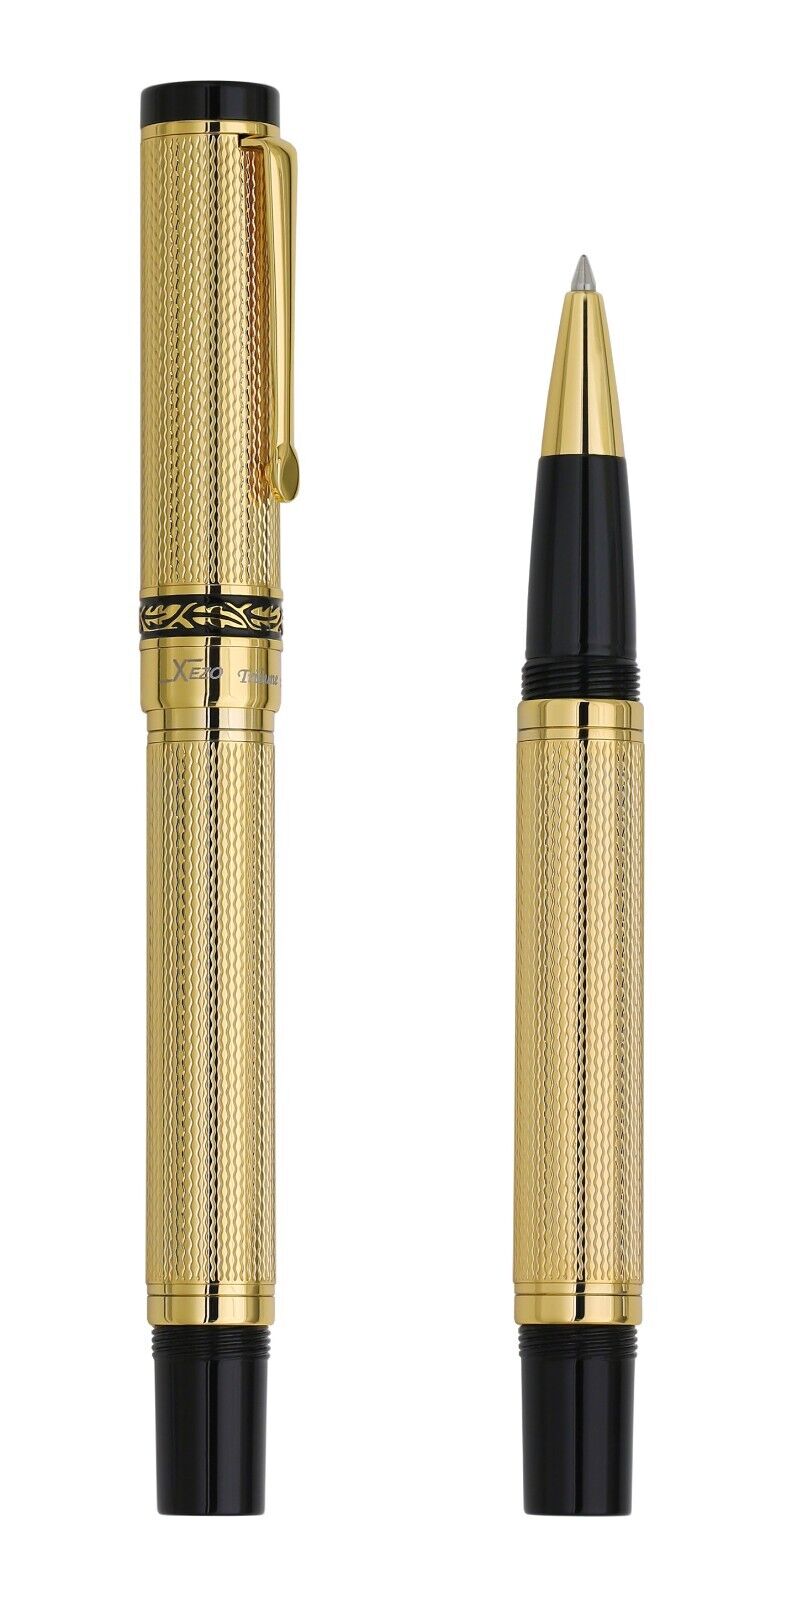 Xezo Tribune Rollerball Pen, 18K Gold Plated Brass. Handmade & Limited Edition